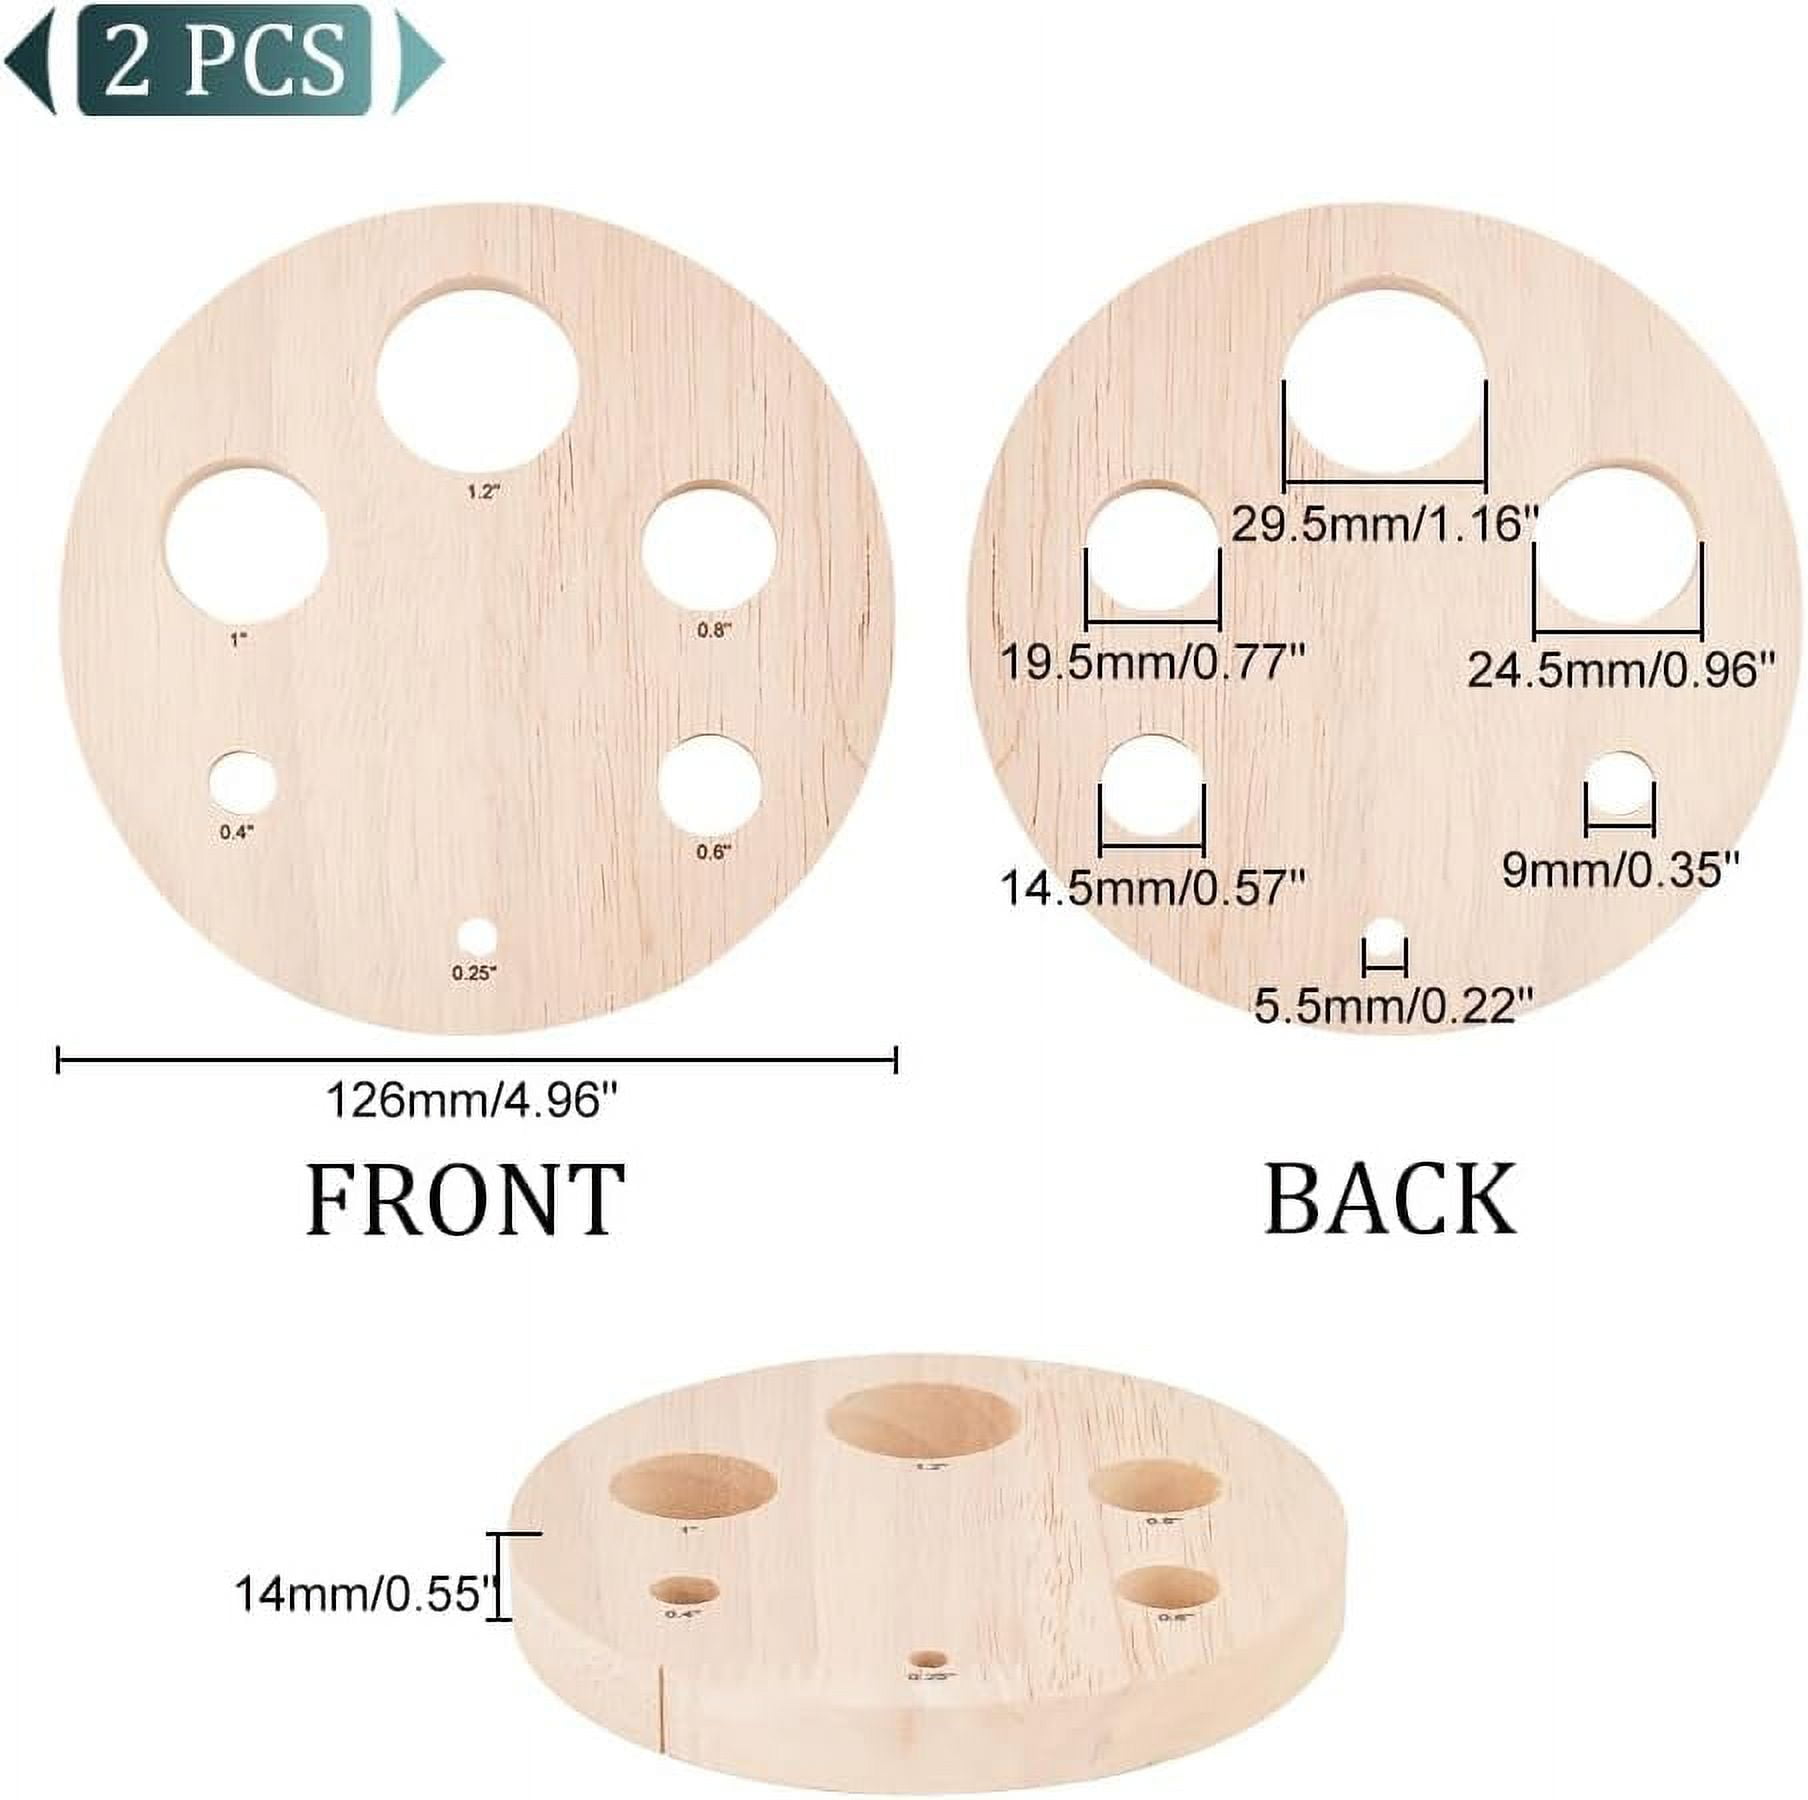 2pcs Safety Eyes Insertion Tool Wood Auxiliary Tool for Attaching Safety Eyes and Washers Amigurumi Craft Eyes Tool Eyeball Gauge Board for Crochet